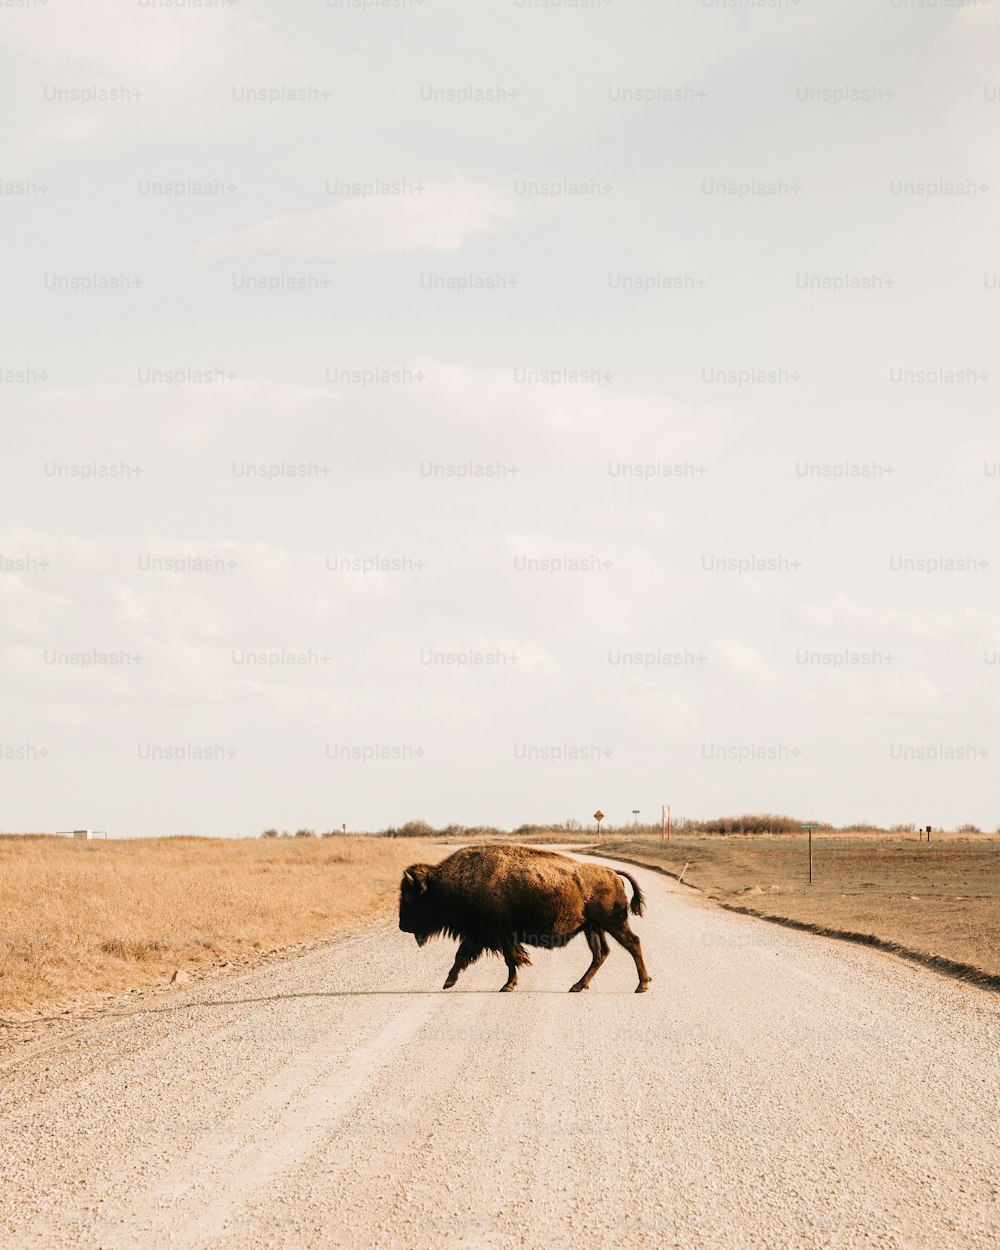 a bison crossing a dirt road in the middle of nowhere